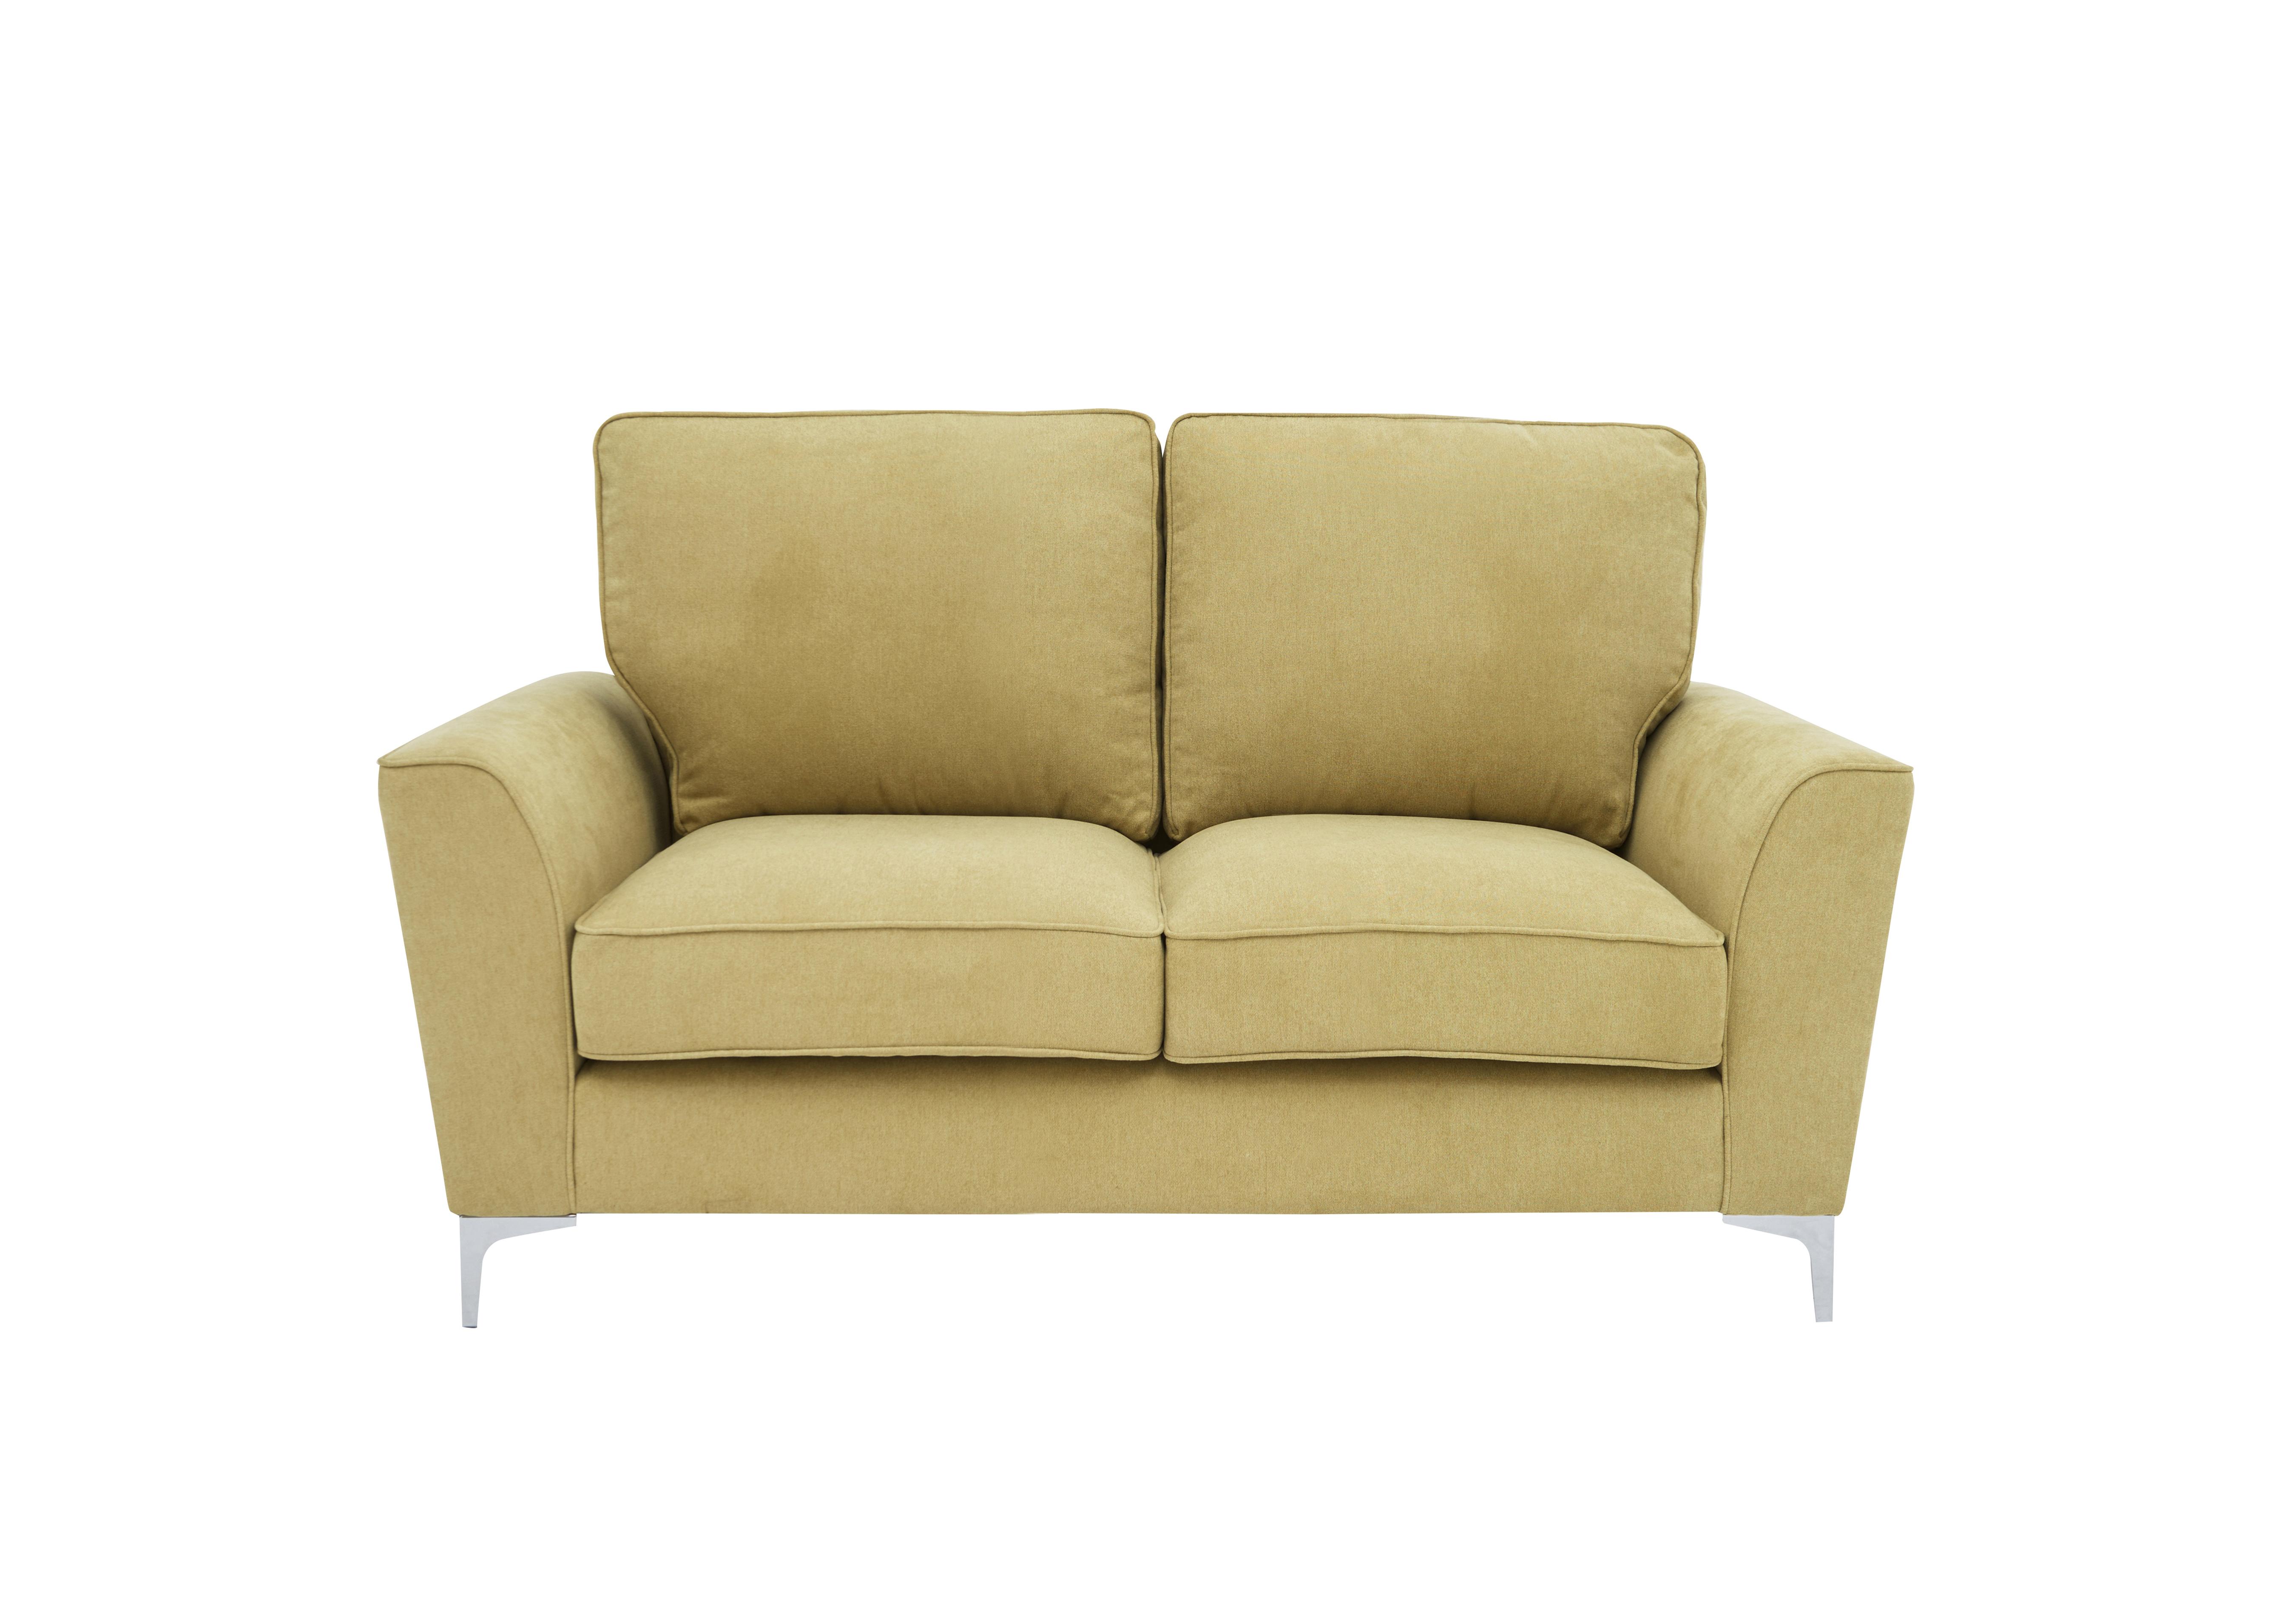 Legend 2 Seater Classic Back Fabric Sofa in Cosmo Apple on Furniture Village